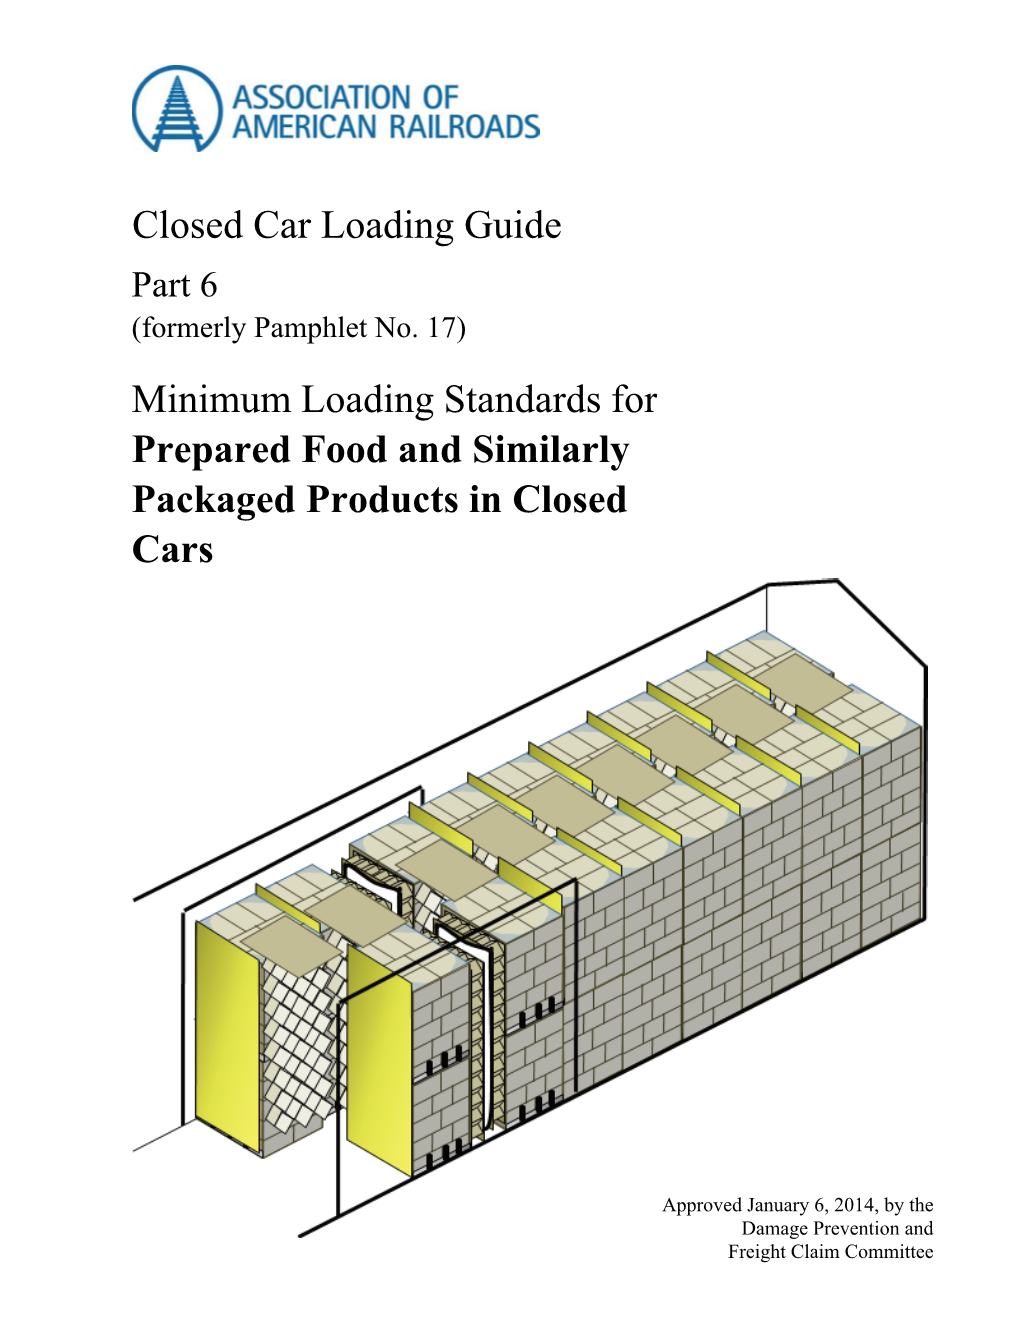 Closed Car Load Guide Part 6